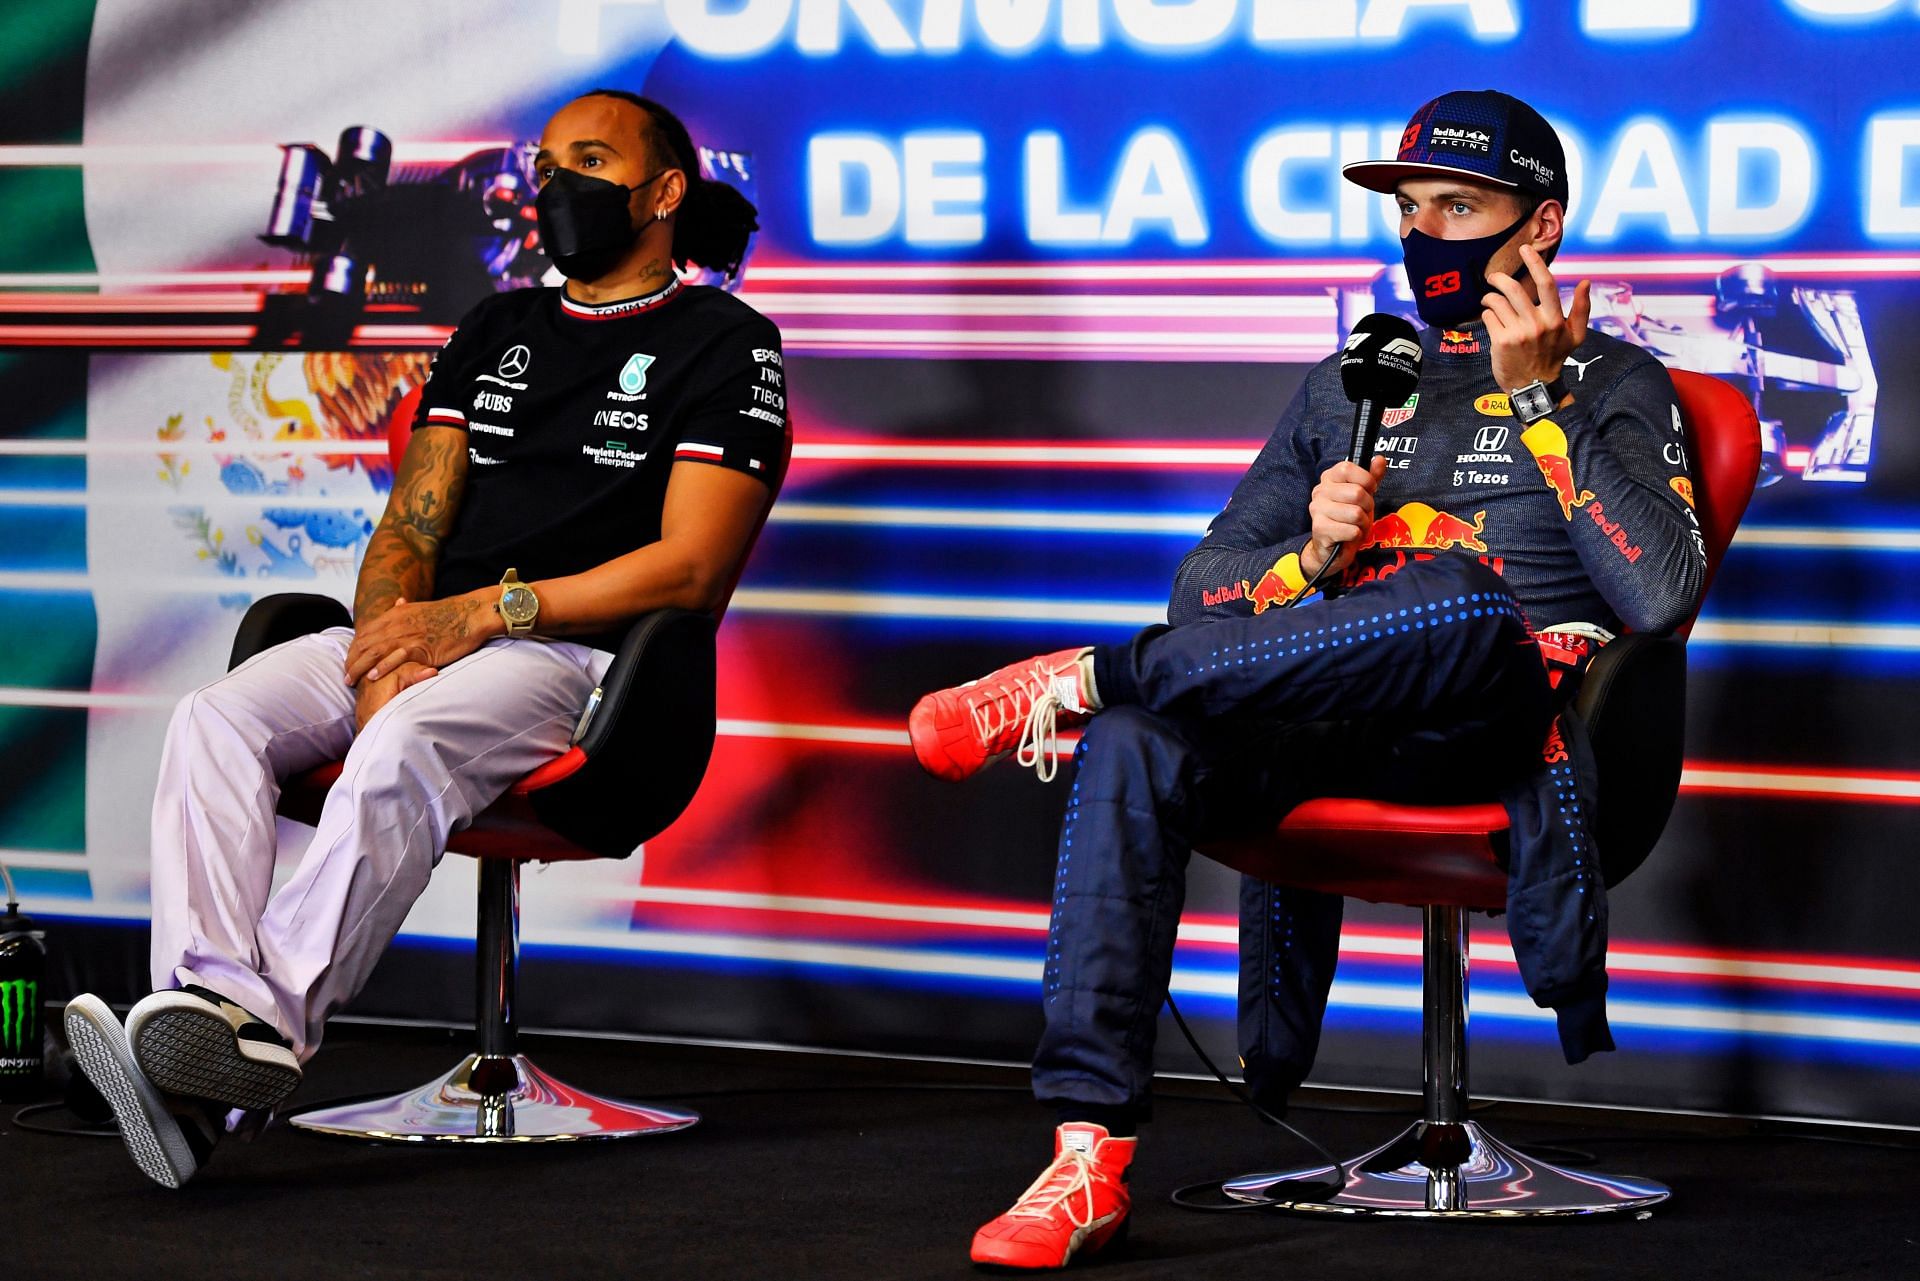 Lewis Hamilton (left) and Max Verstappen (right) were engaged in an intense battle for the championship in 2021